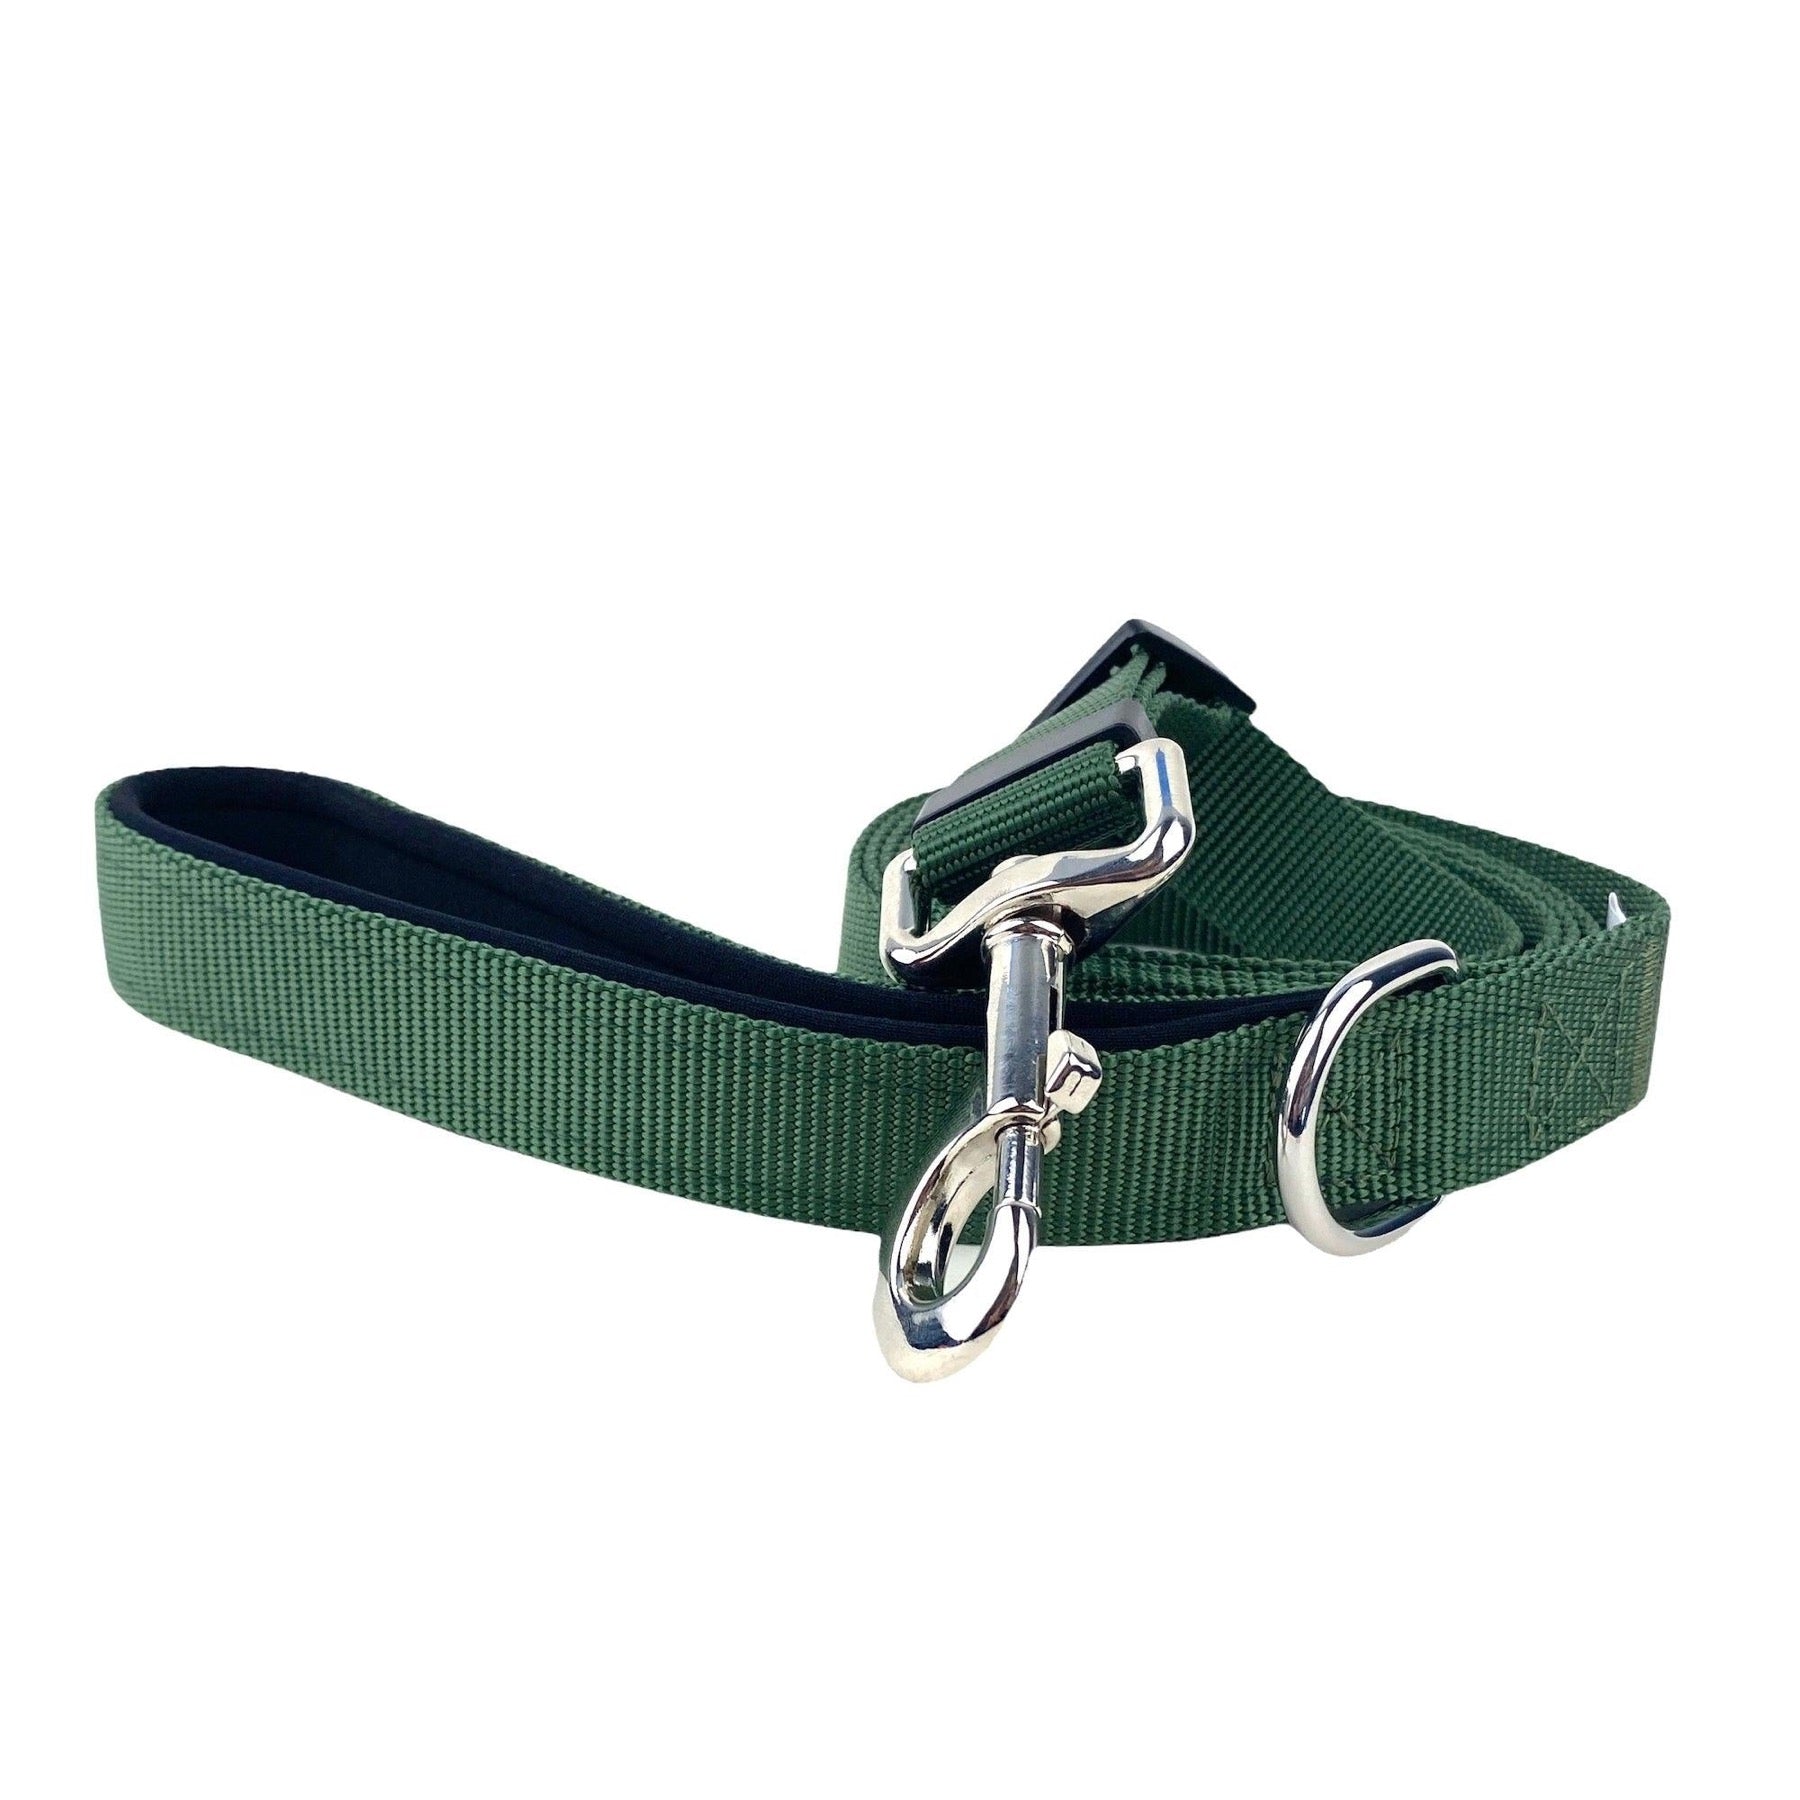 a photograph of a forest green dog leash by FearLess pet rolled up to show the snap hook